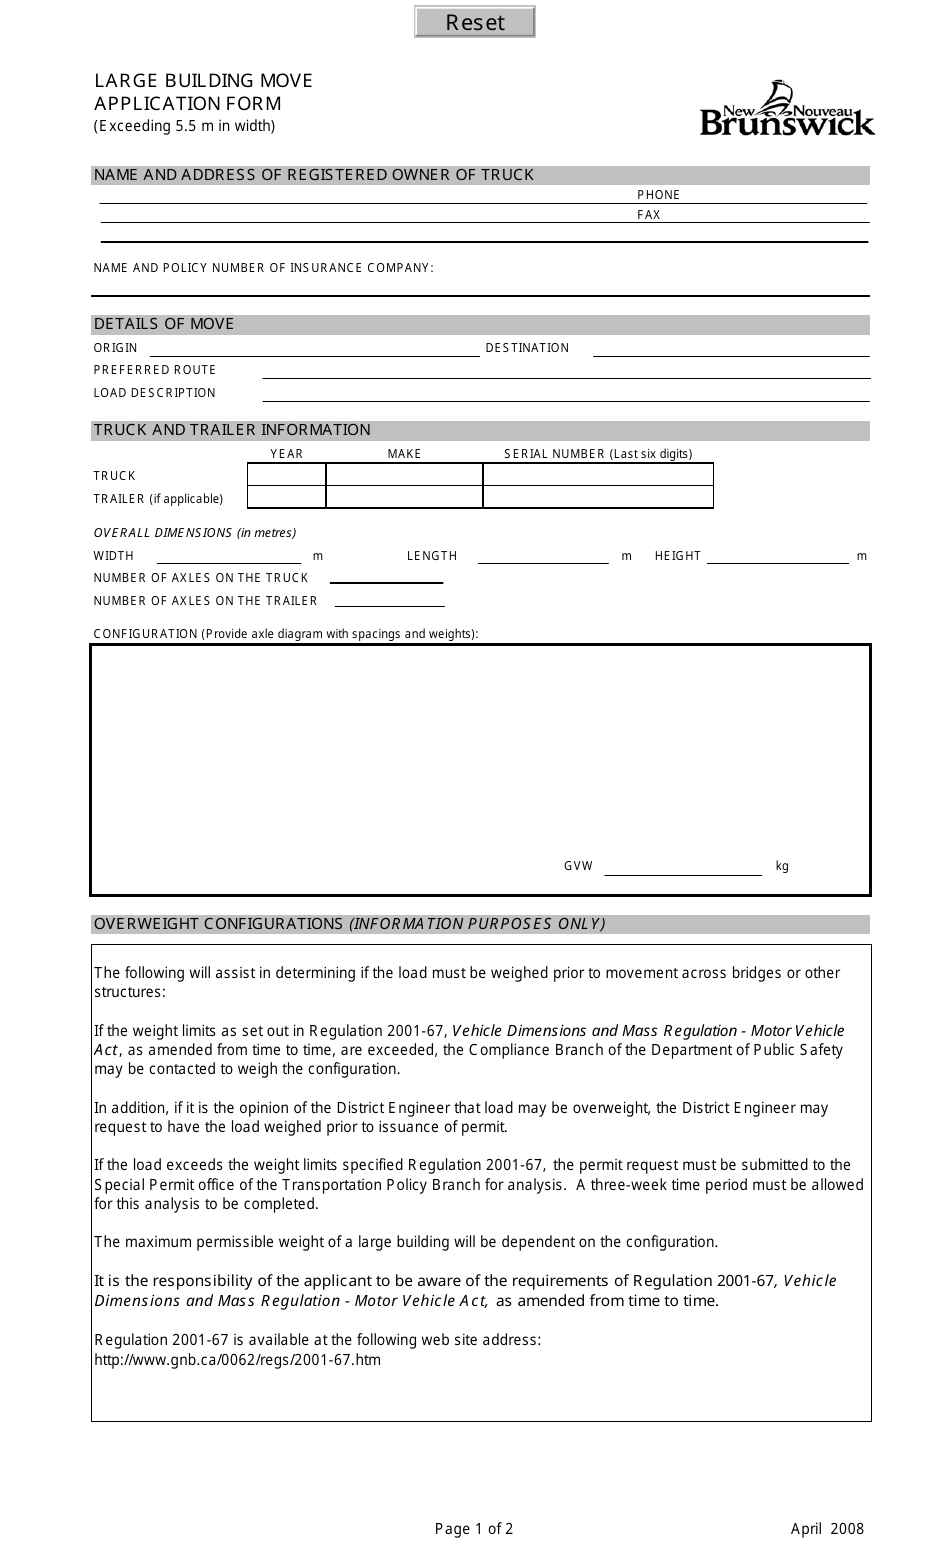 Large Building Move Application Form - New Brunswick, Canada, Page 1